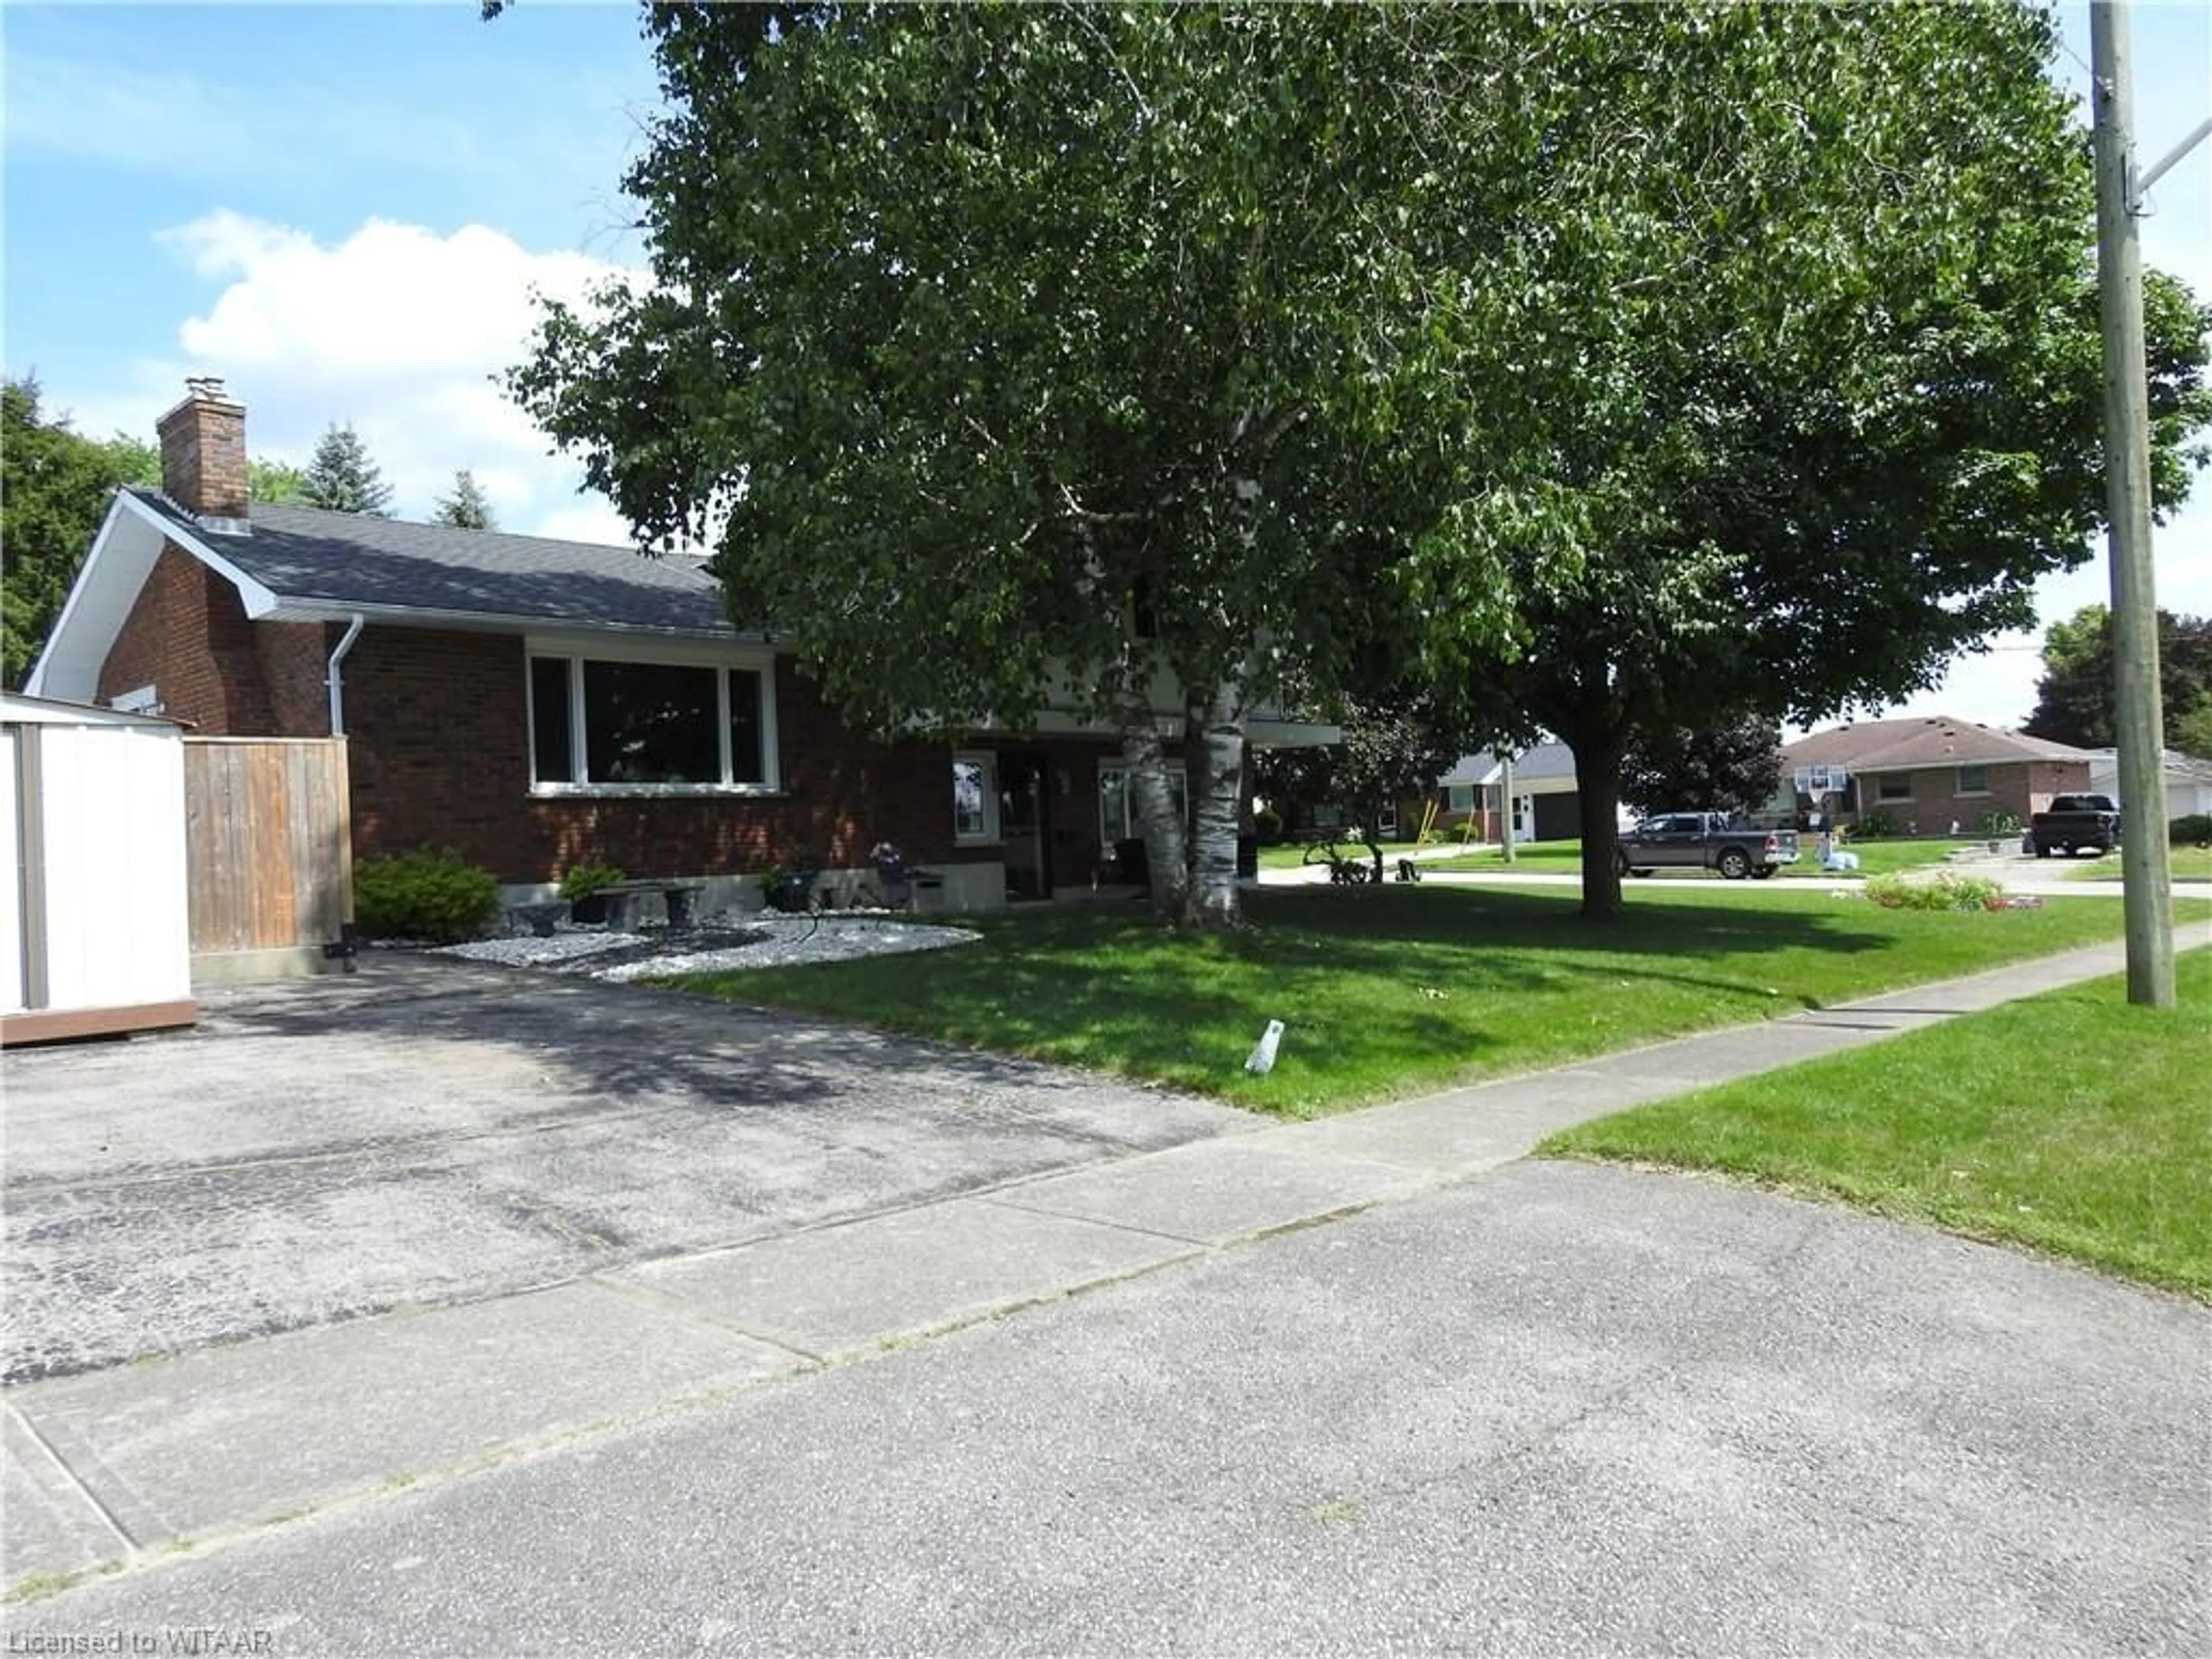 Frontside or backside of a home for 260 Ferncrest Rd, Woodstock Ontario N4S 7S7